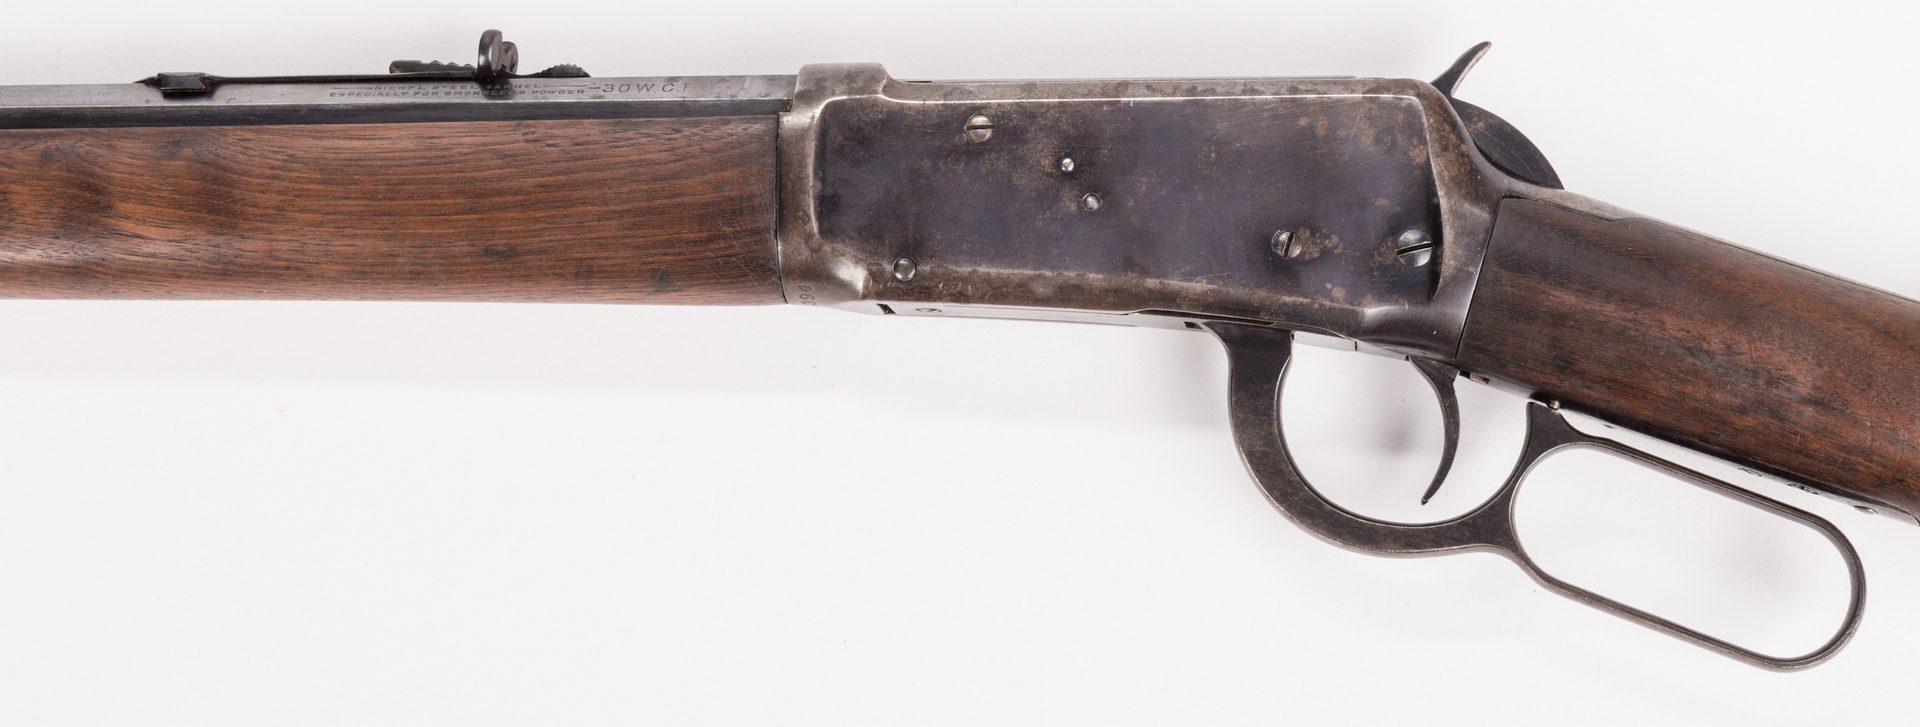 Lot 790: Winchester Model 1894 30-30 Win Lever Action Rifle